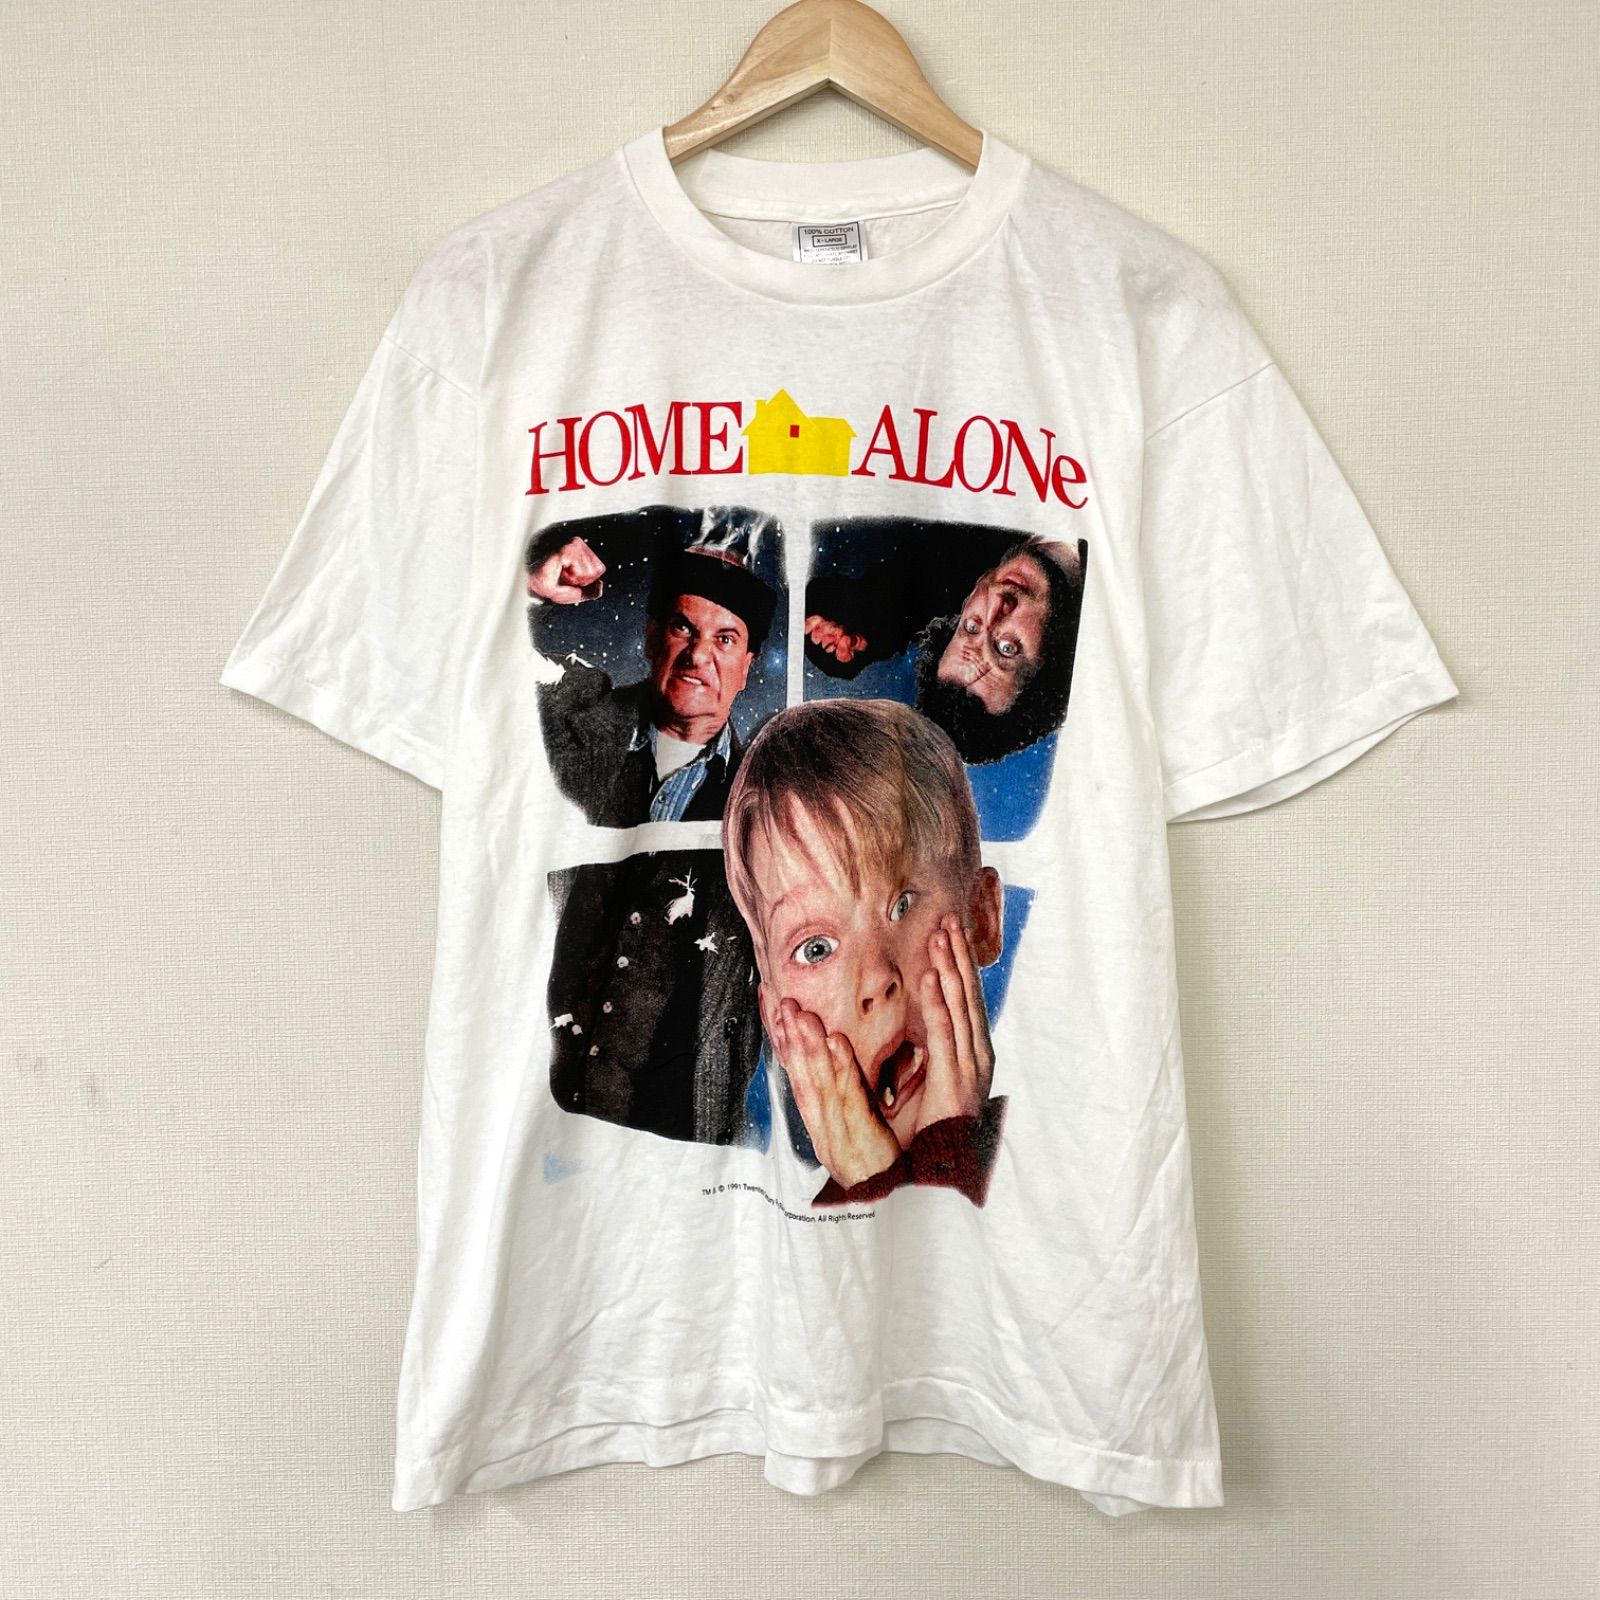 HOME ALONE ホームアローン フォトプリント Tシャツ 半袖 輸入品